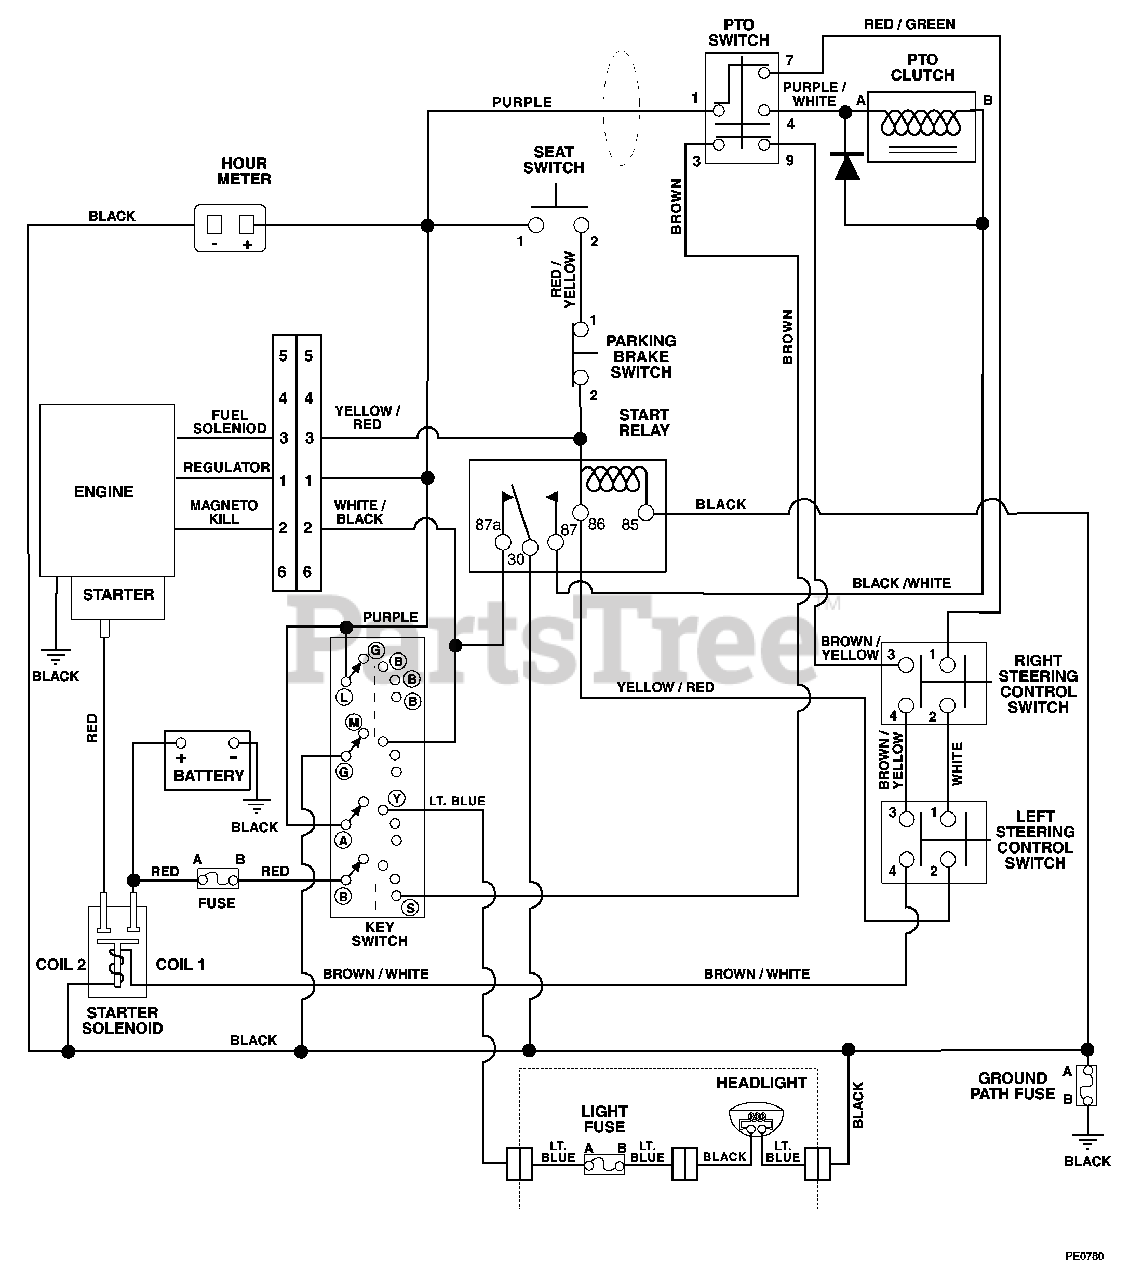 16 Hp Briggs And Stratton Wiring Diagram from www.partstree.com